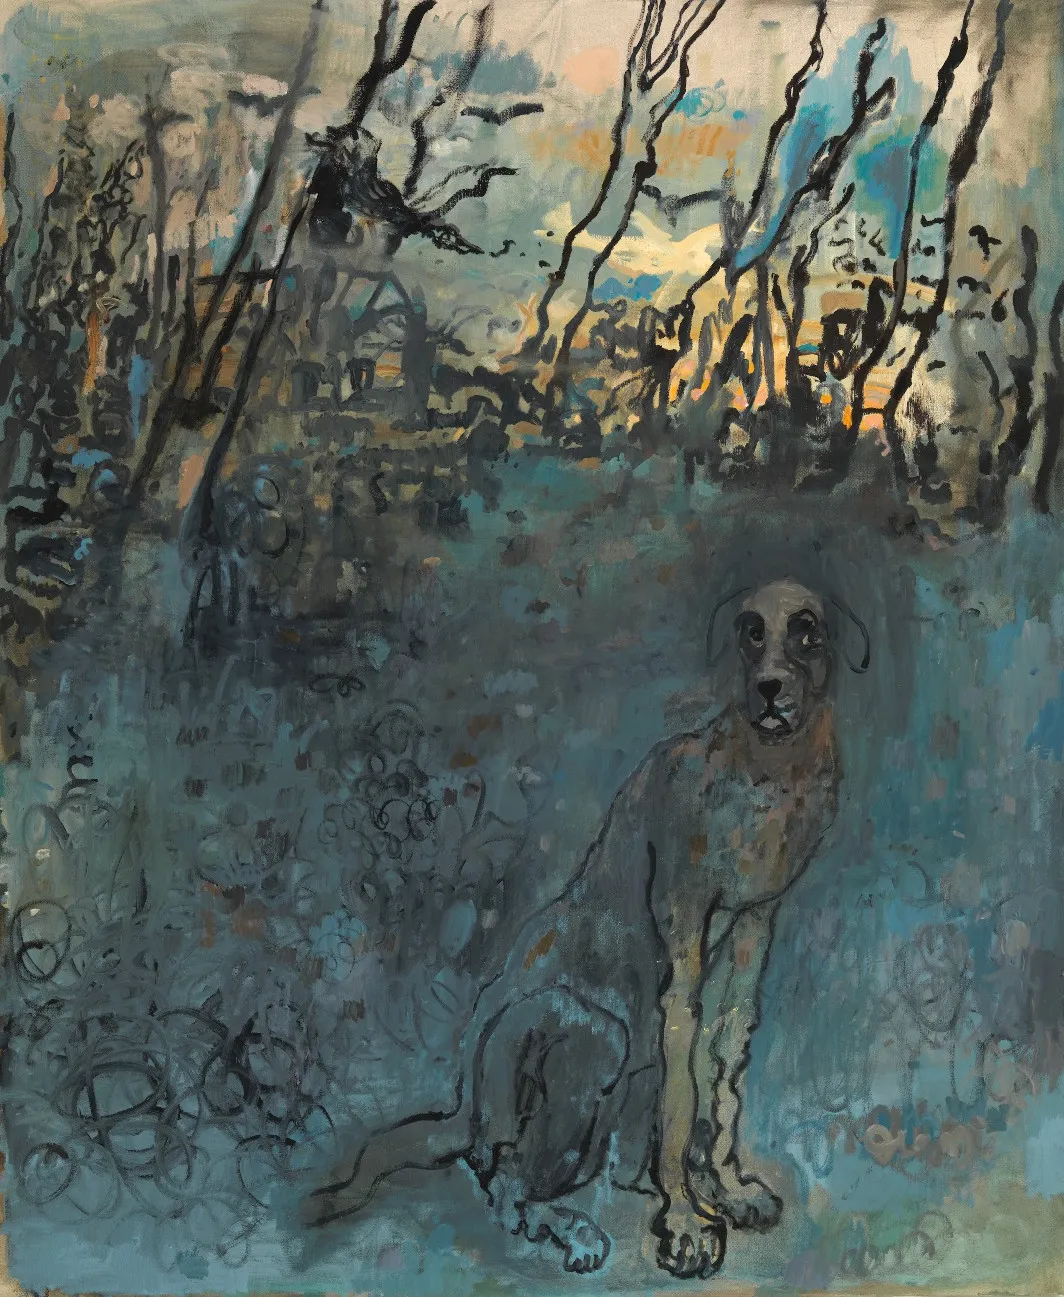 Painting of a dog sitting in front of surrounded by blueish vegetation at dusk/ dawn